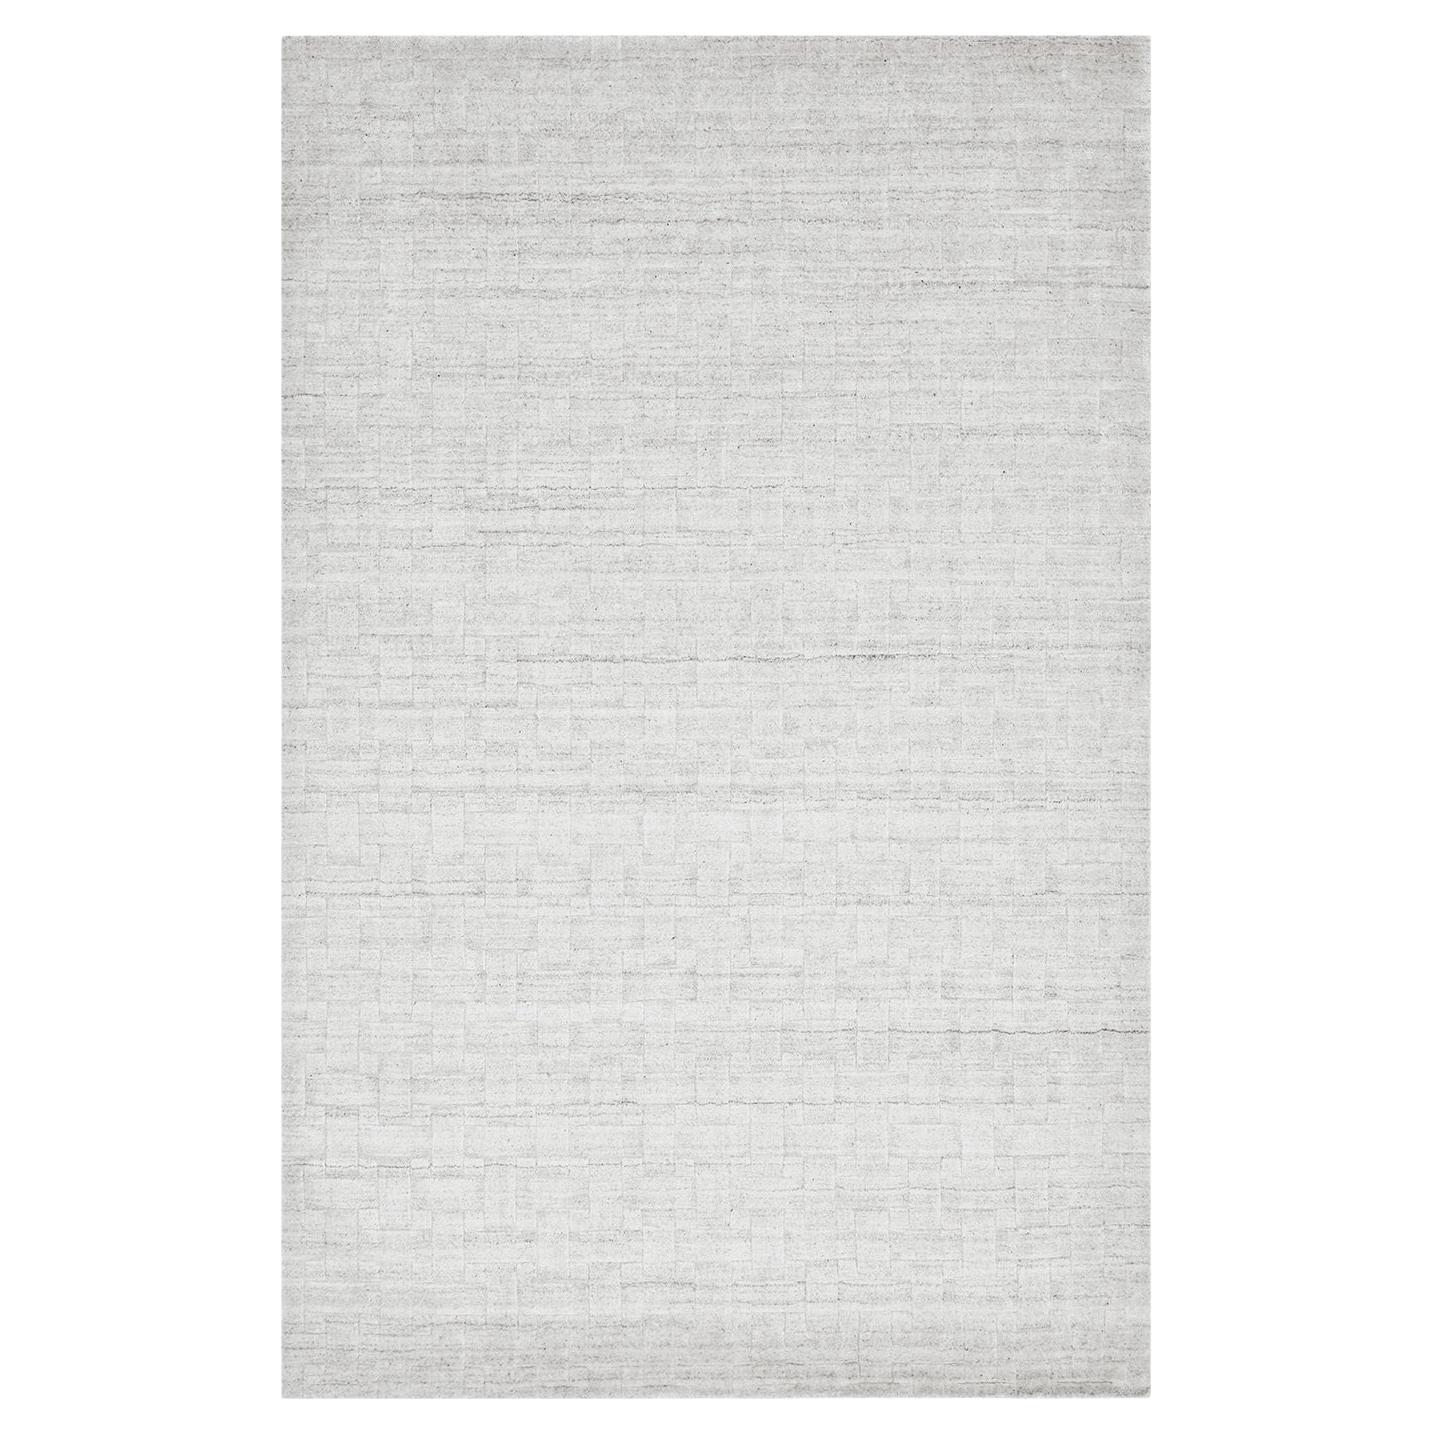 Solo Rugs Peyton Contemporary Geometric Handmade Area Rug Ivory For Sale